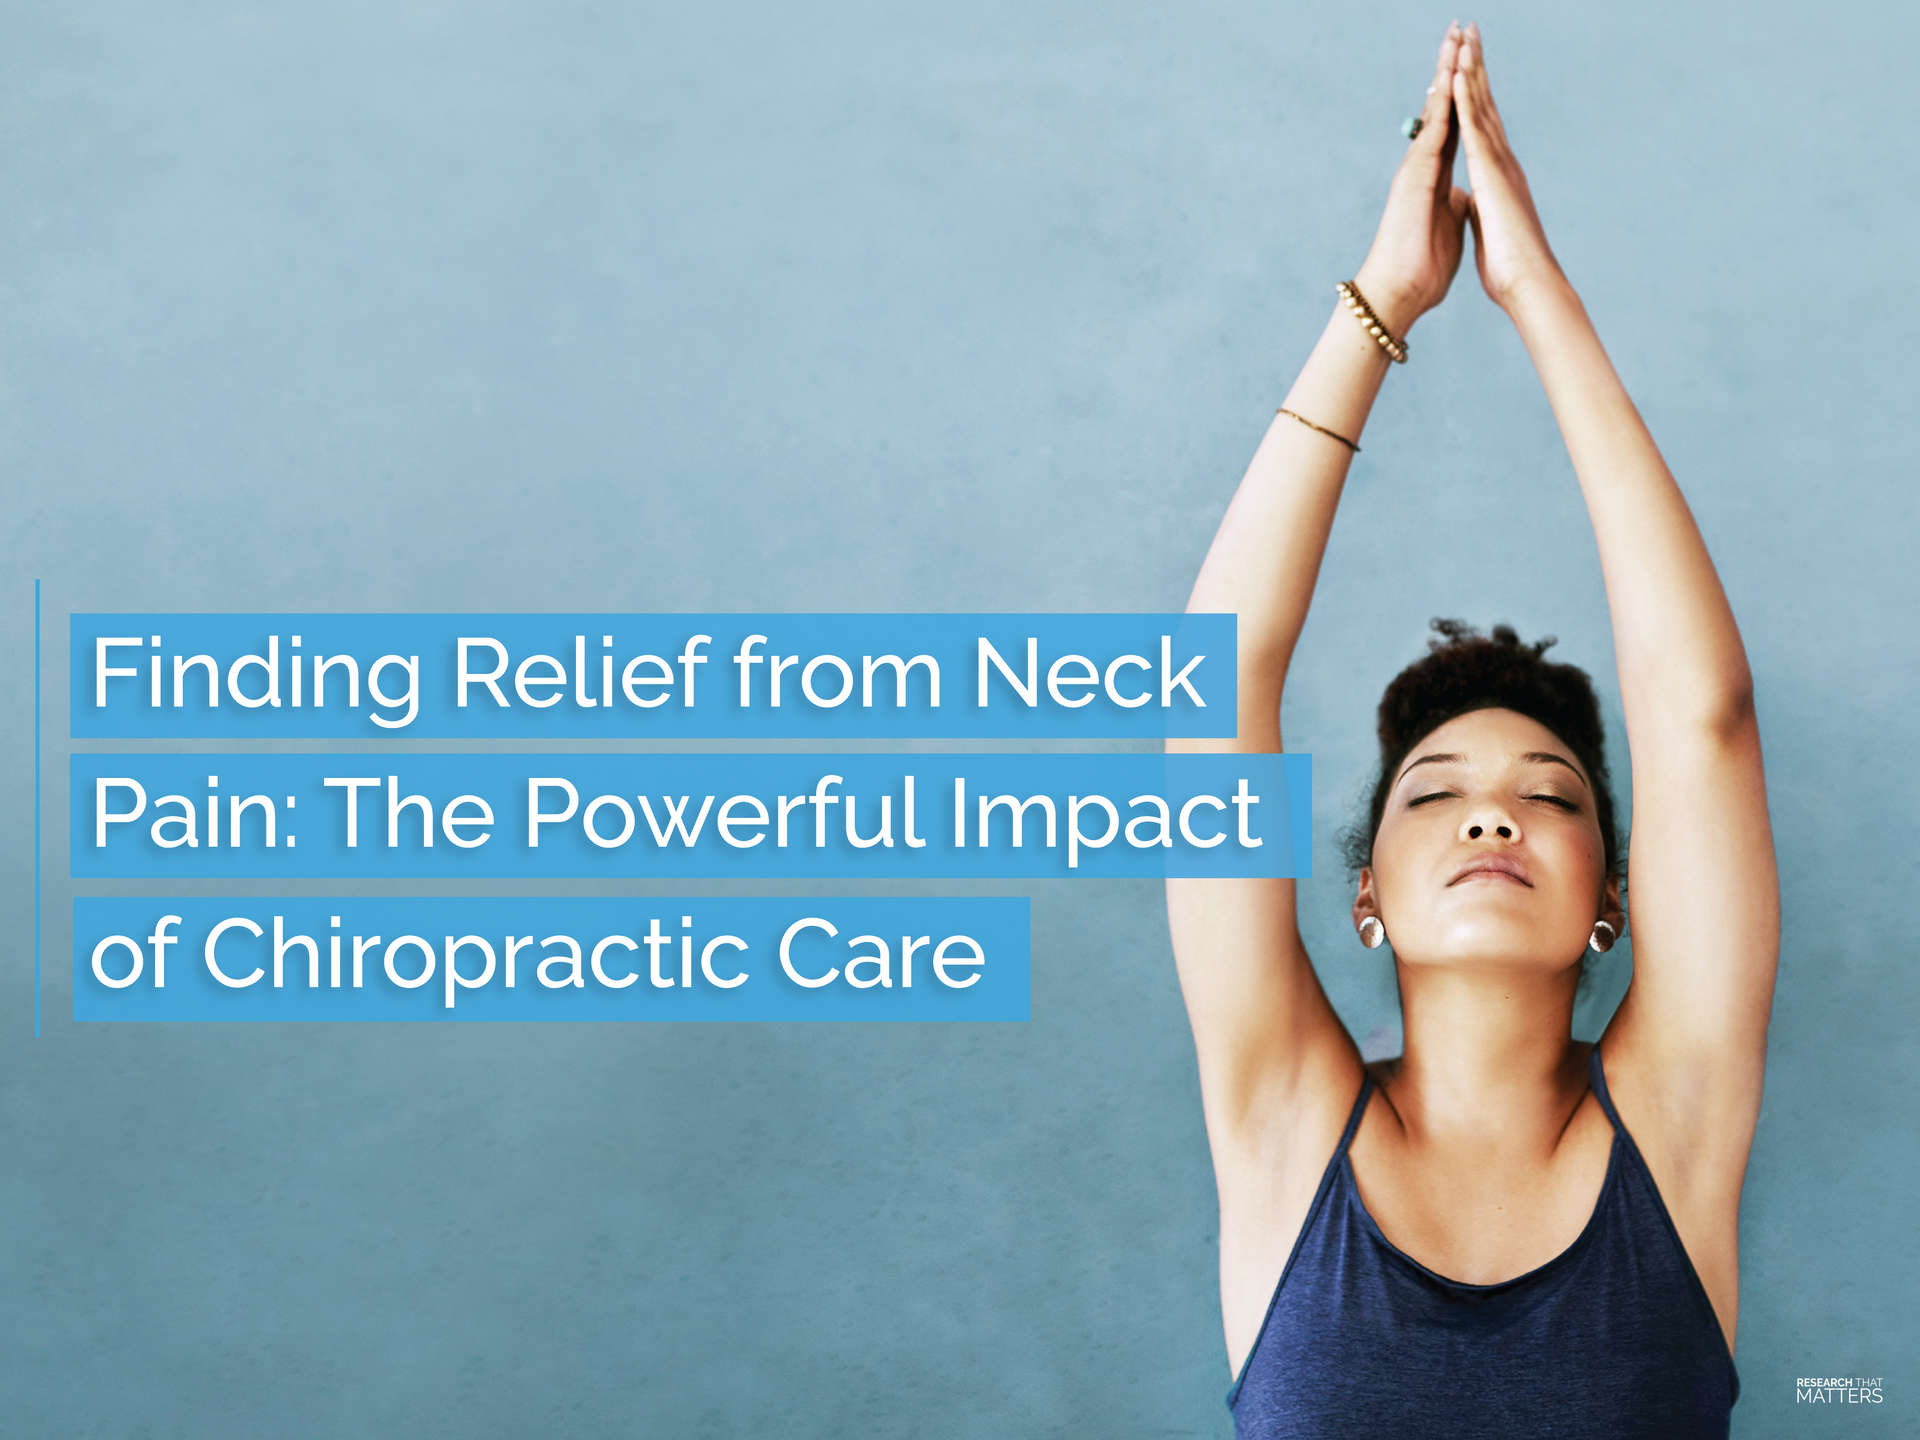 A woman stretching with a caption that says Finding Relief from Neck Pain: The Powerful Impact of Chiropractic Care